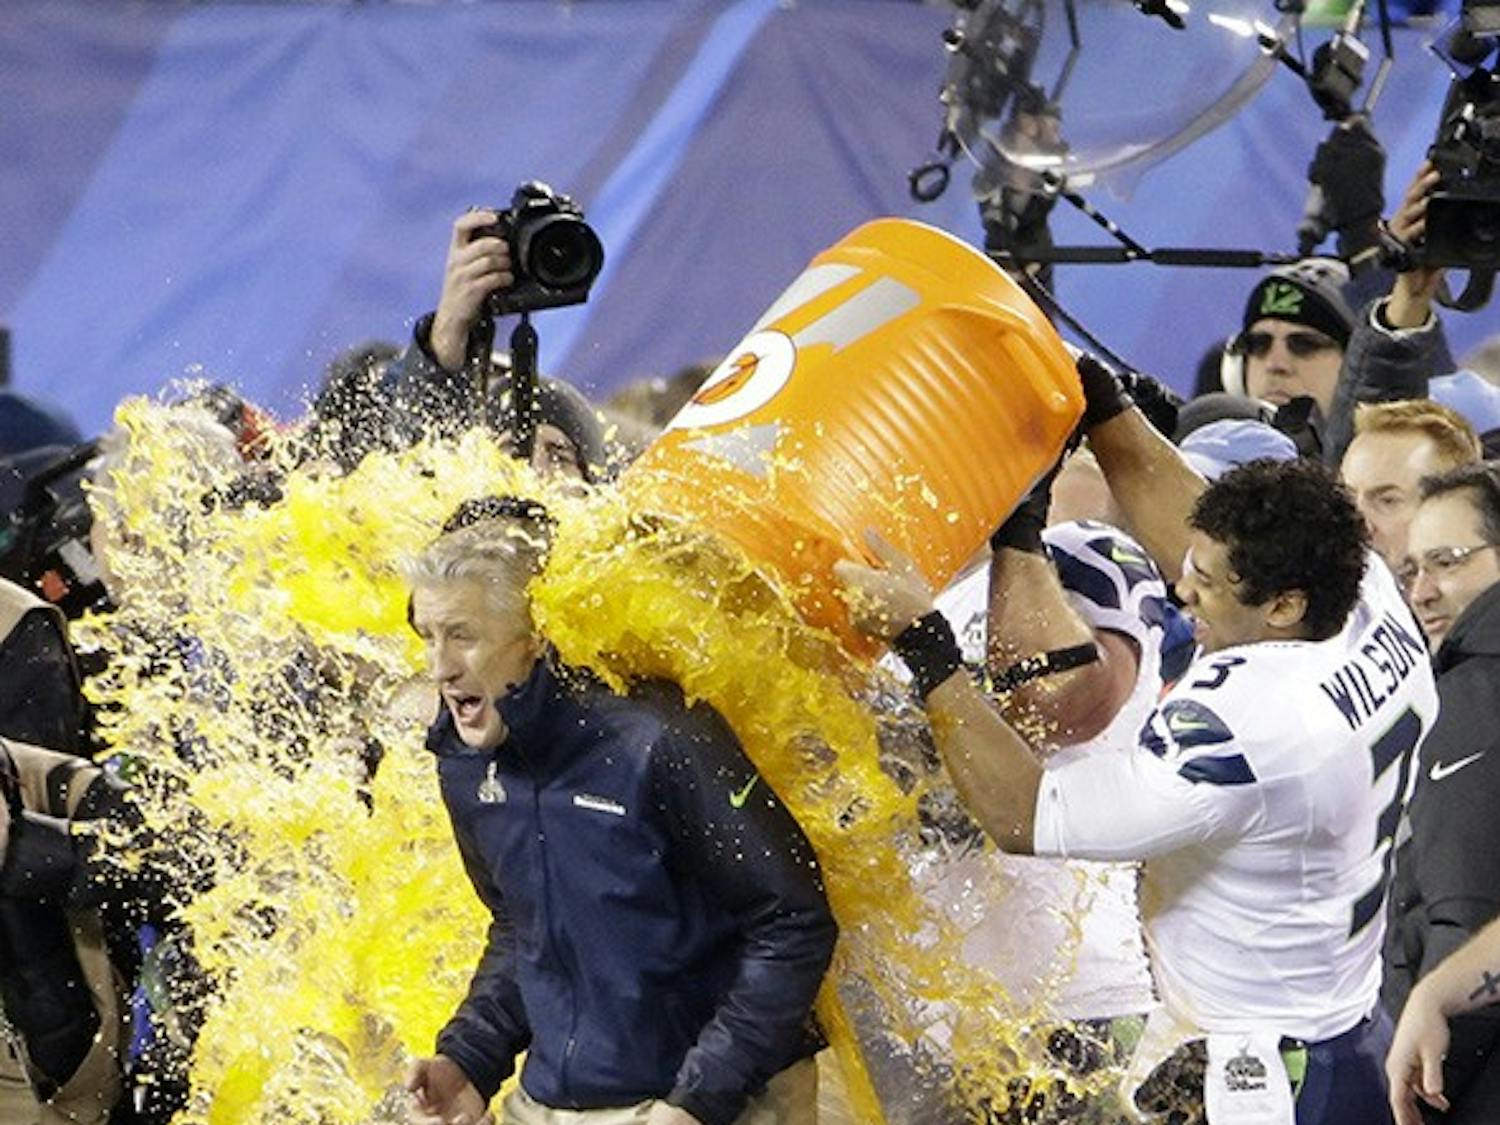 Seattle Seahawks players dump Gatorade on head coach Pete Carroll at the conclusion of a 43-8 win against the Denver Broncos in Super Bowl XLVIII at MetLife Stadium in East Rutherford, N.J., on Sunday, Feb. 2, 2014. (J. Patric Schneider/MCT)